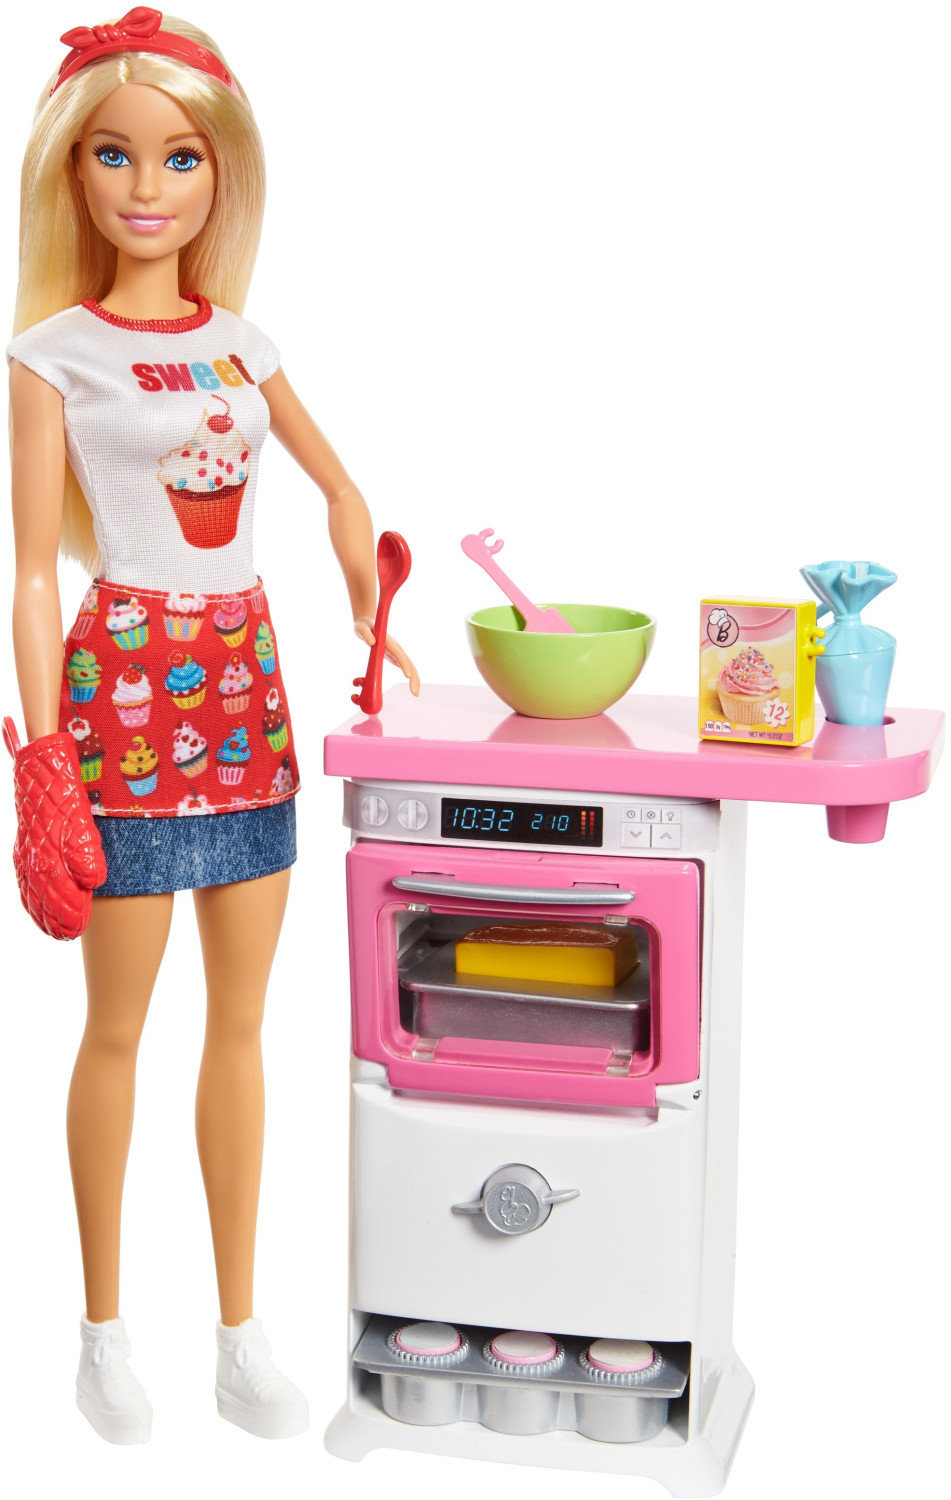 Barbie Career Dolls - Bakery Chef and Playset (FHP57)